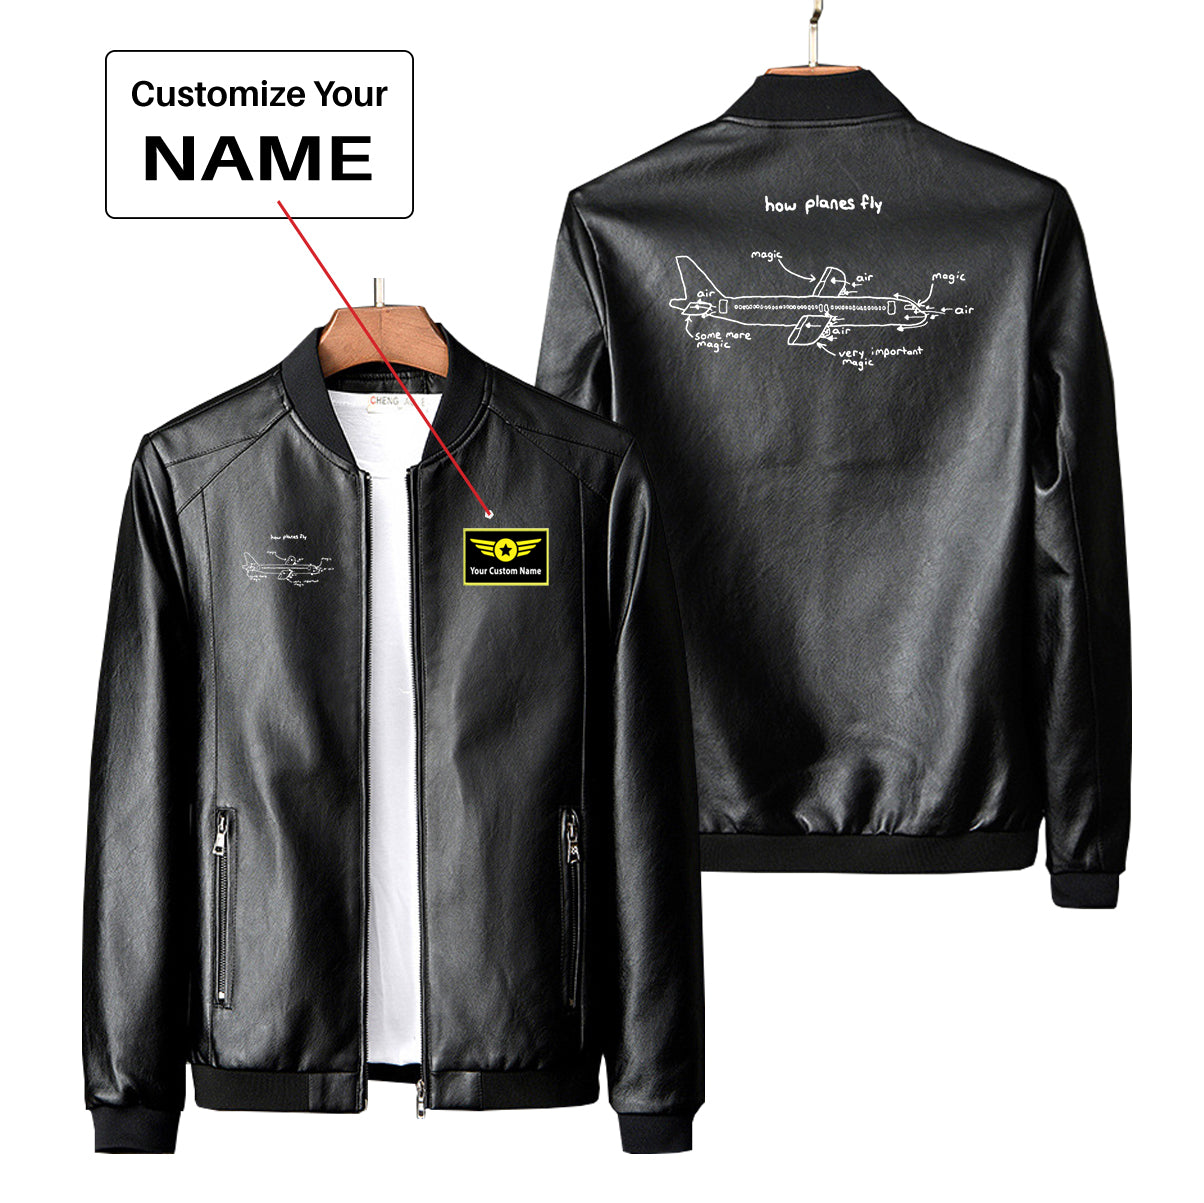 How Planes Fly Designed PU Leather Jackets